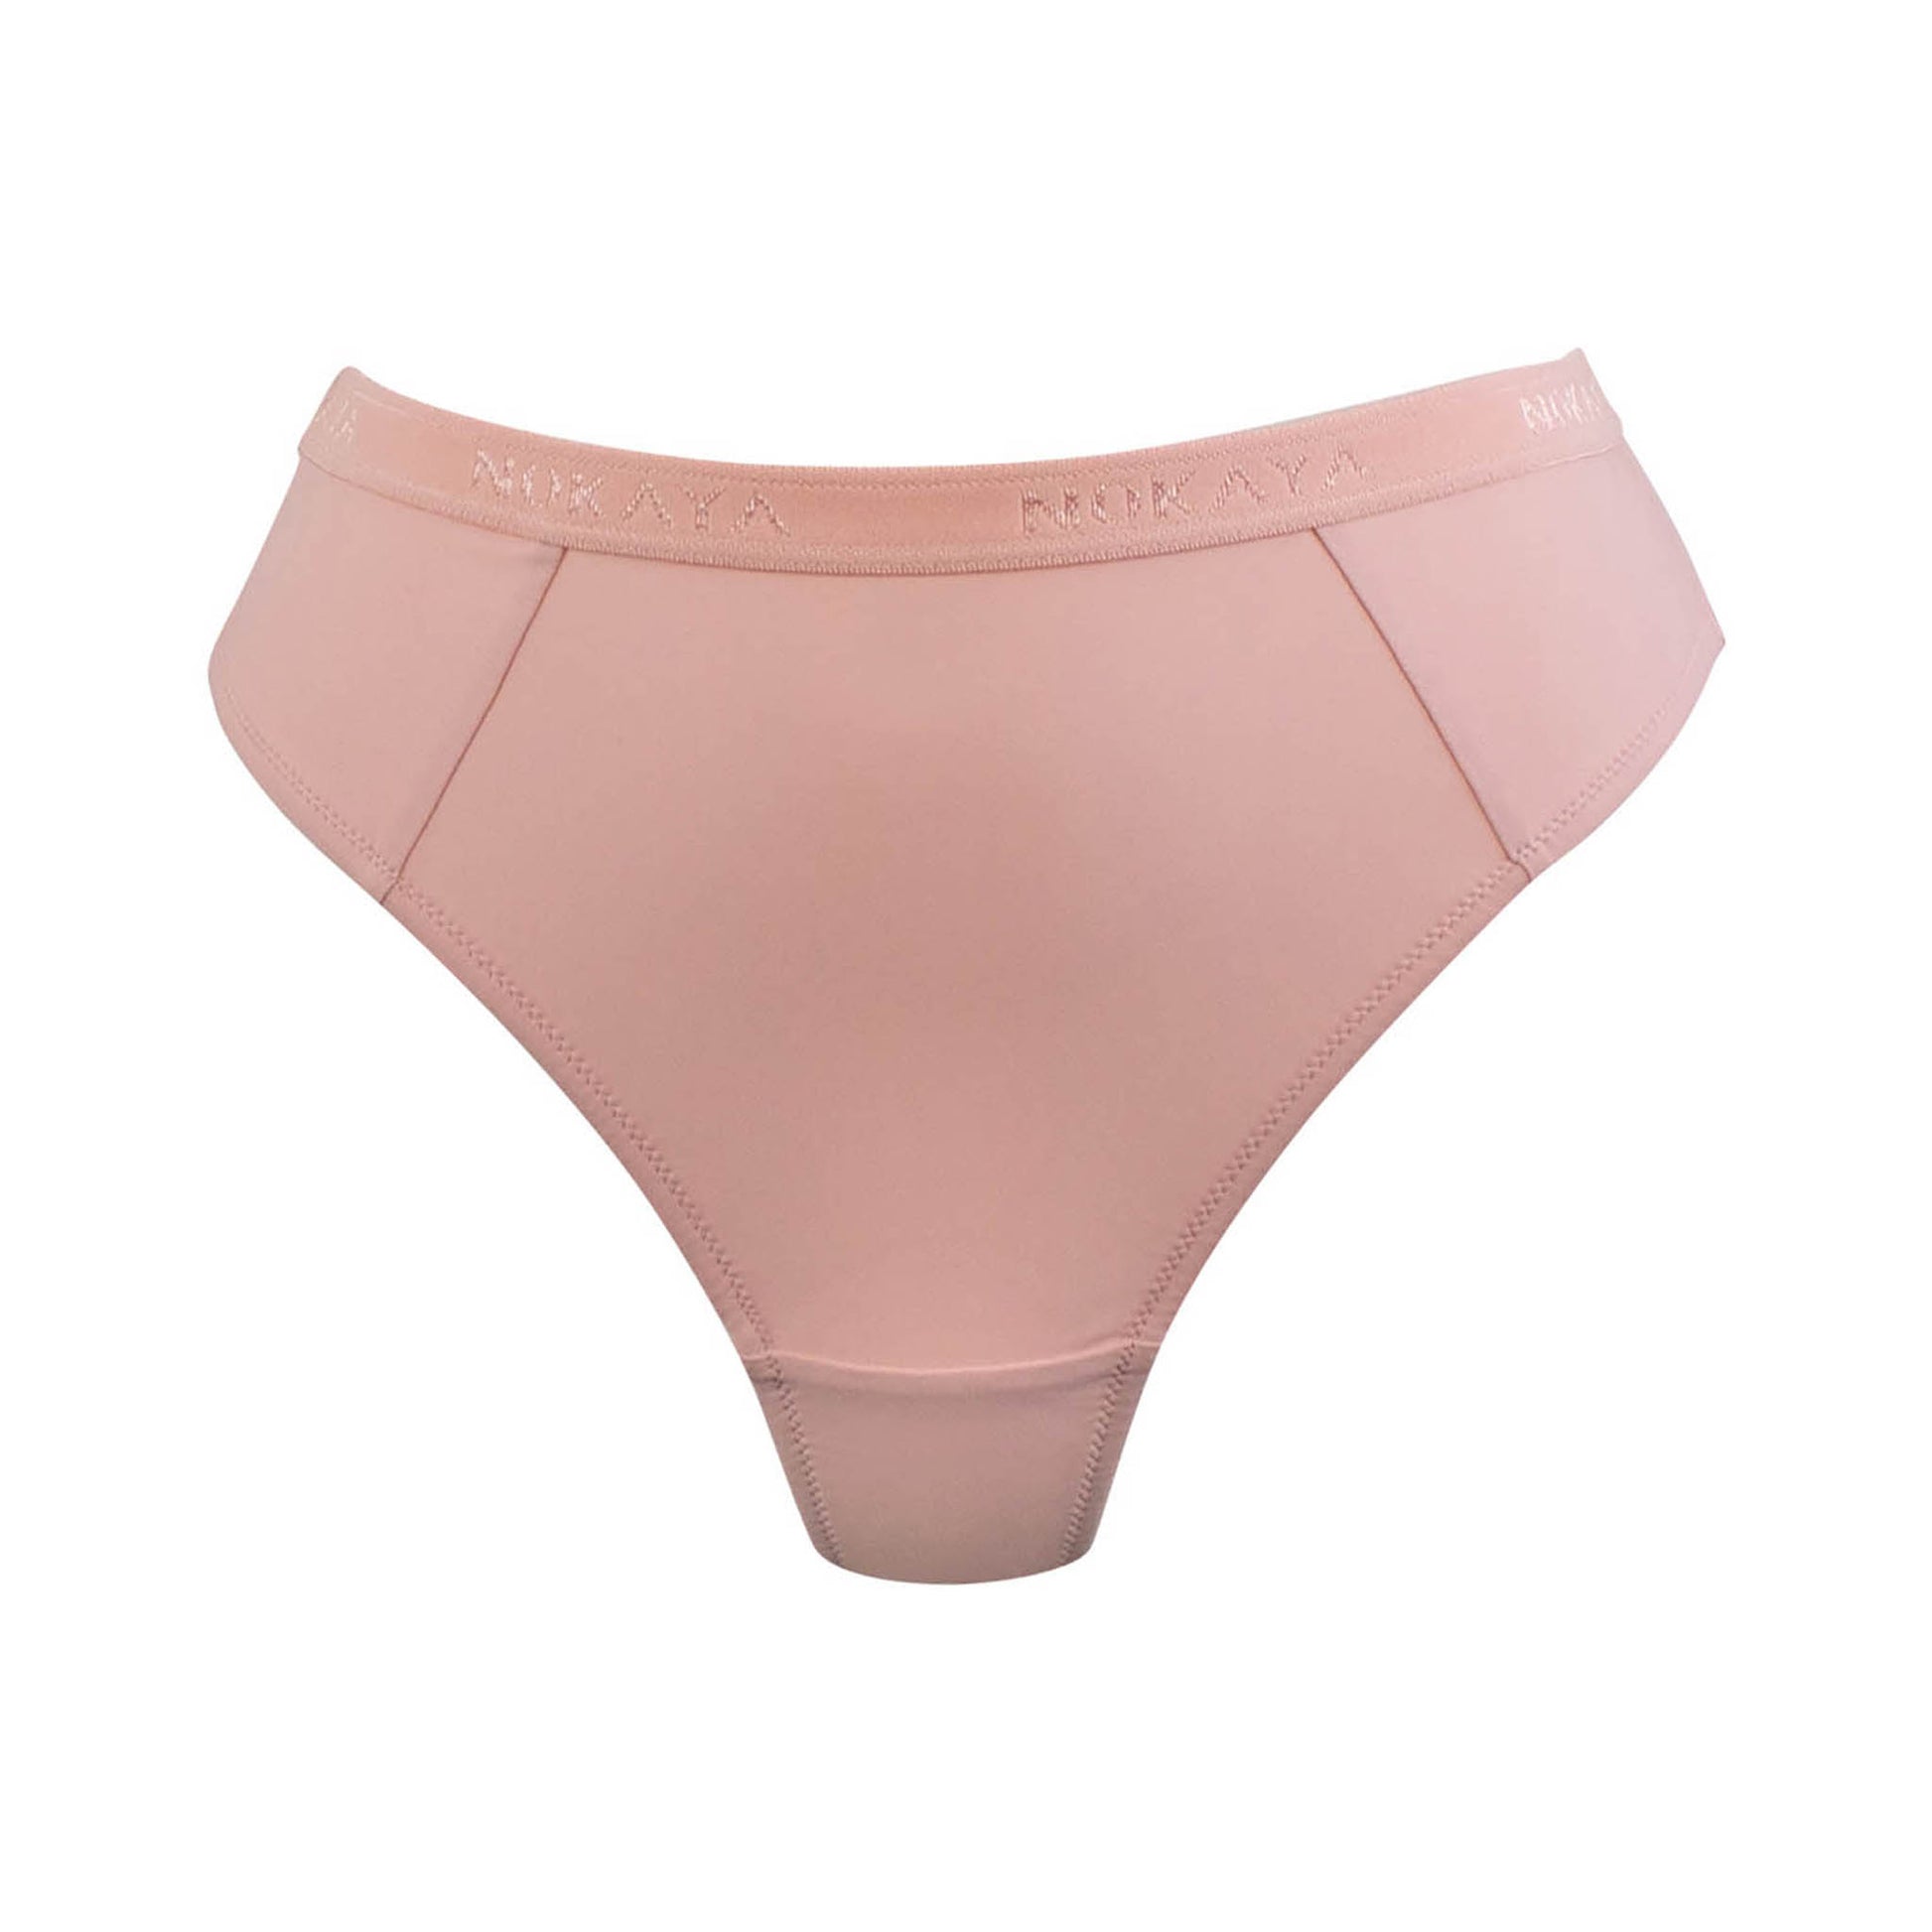 Beauty House T Pants Set Back For Girls Transparent, Ultra Thin, No Steel  Ring French Bra And Triangle Thong Underwear Q0705 From Sihuai03, $10.14